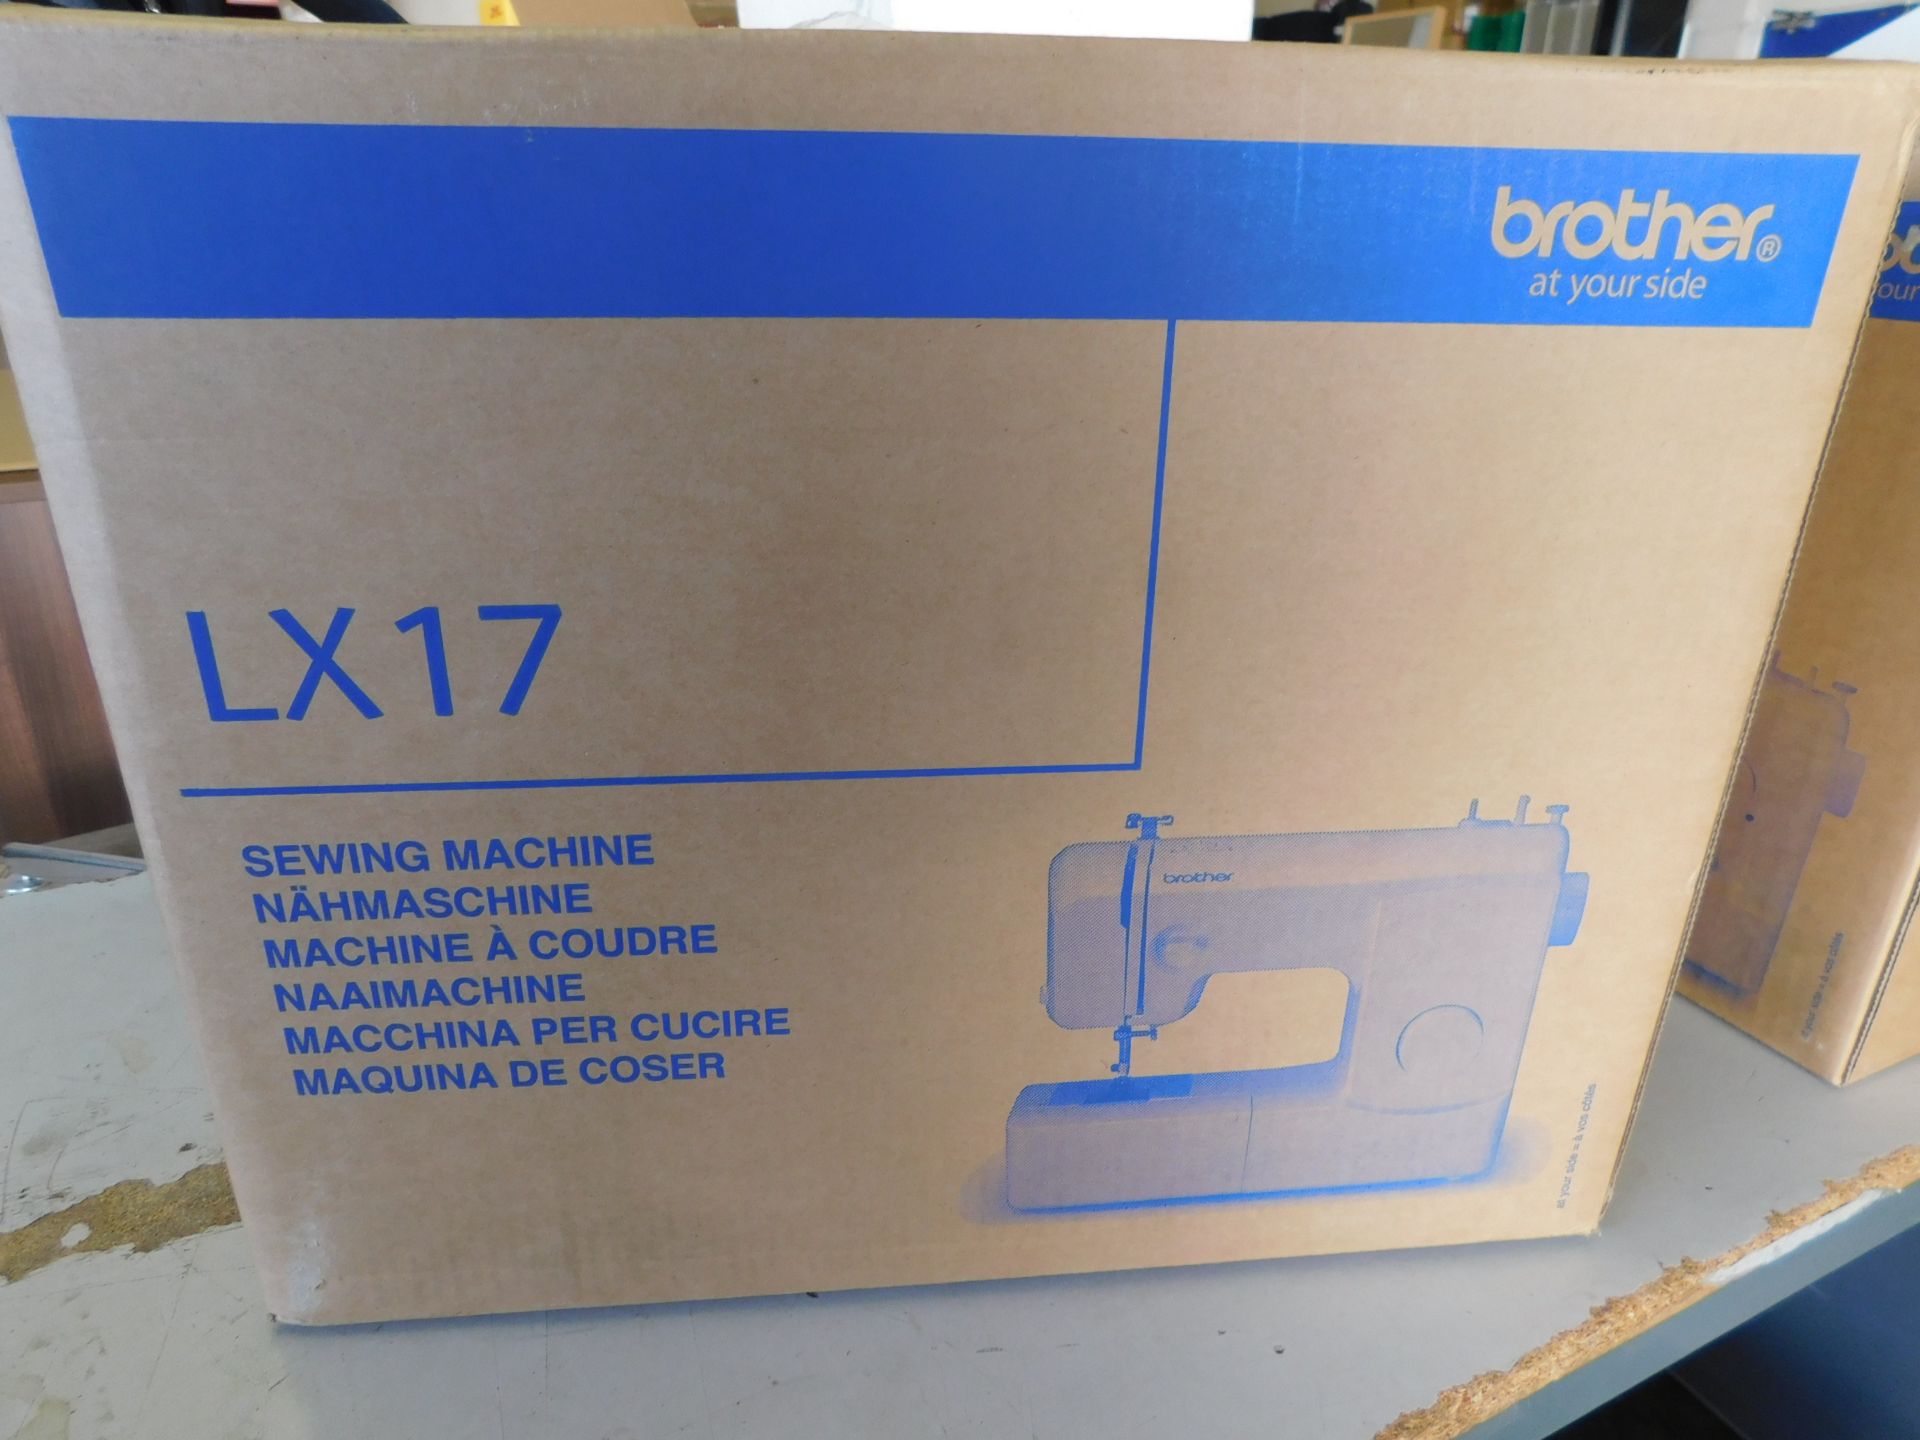 Brother LX17 Sewing Machine (Location Stockport. Please Refer to General Notes)